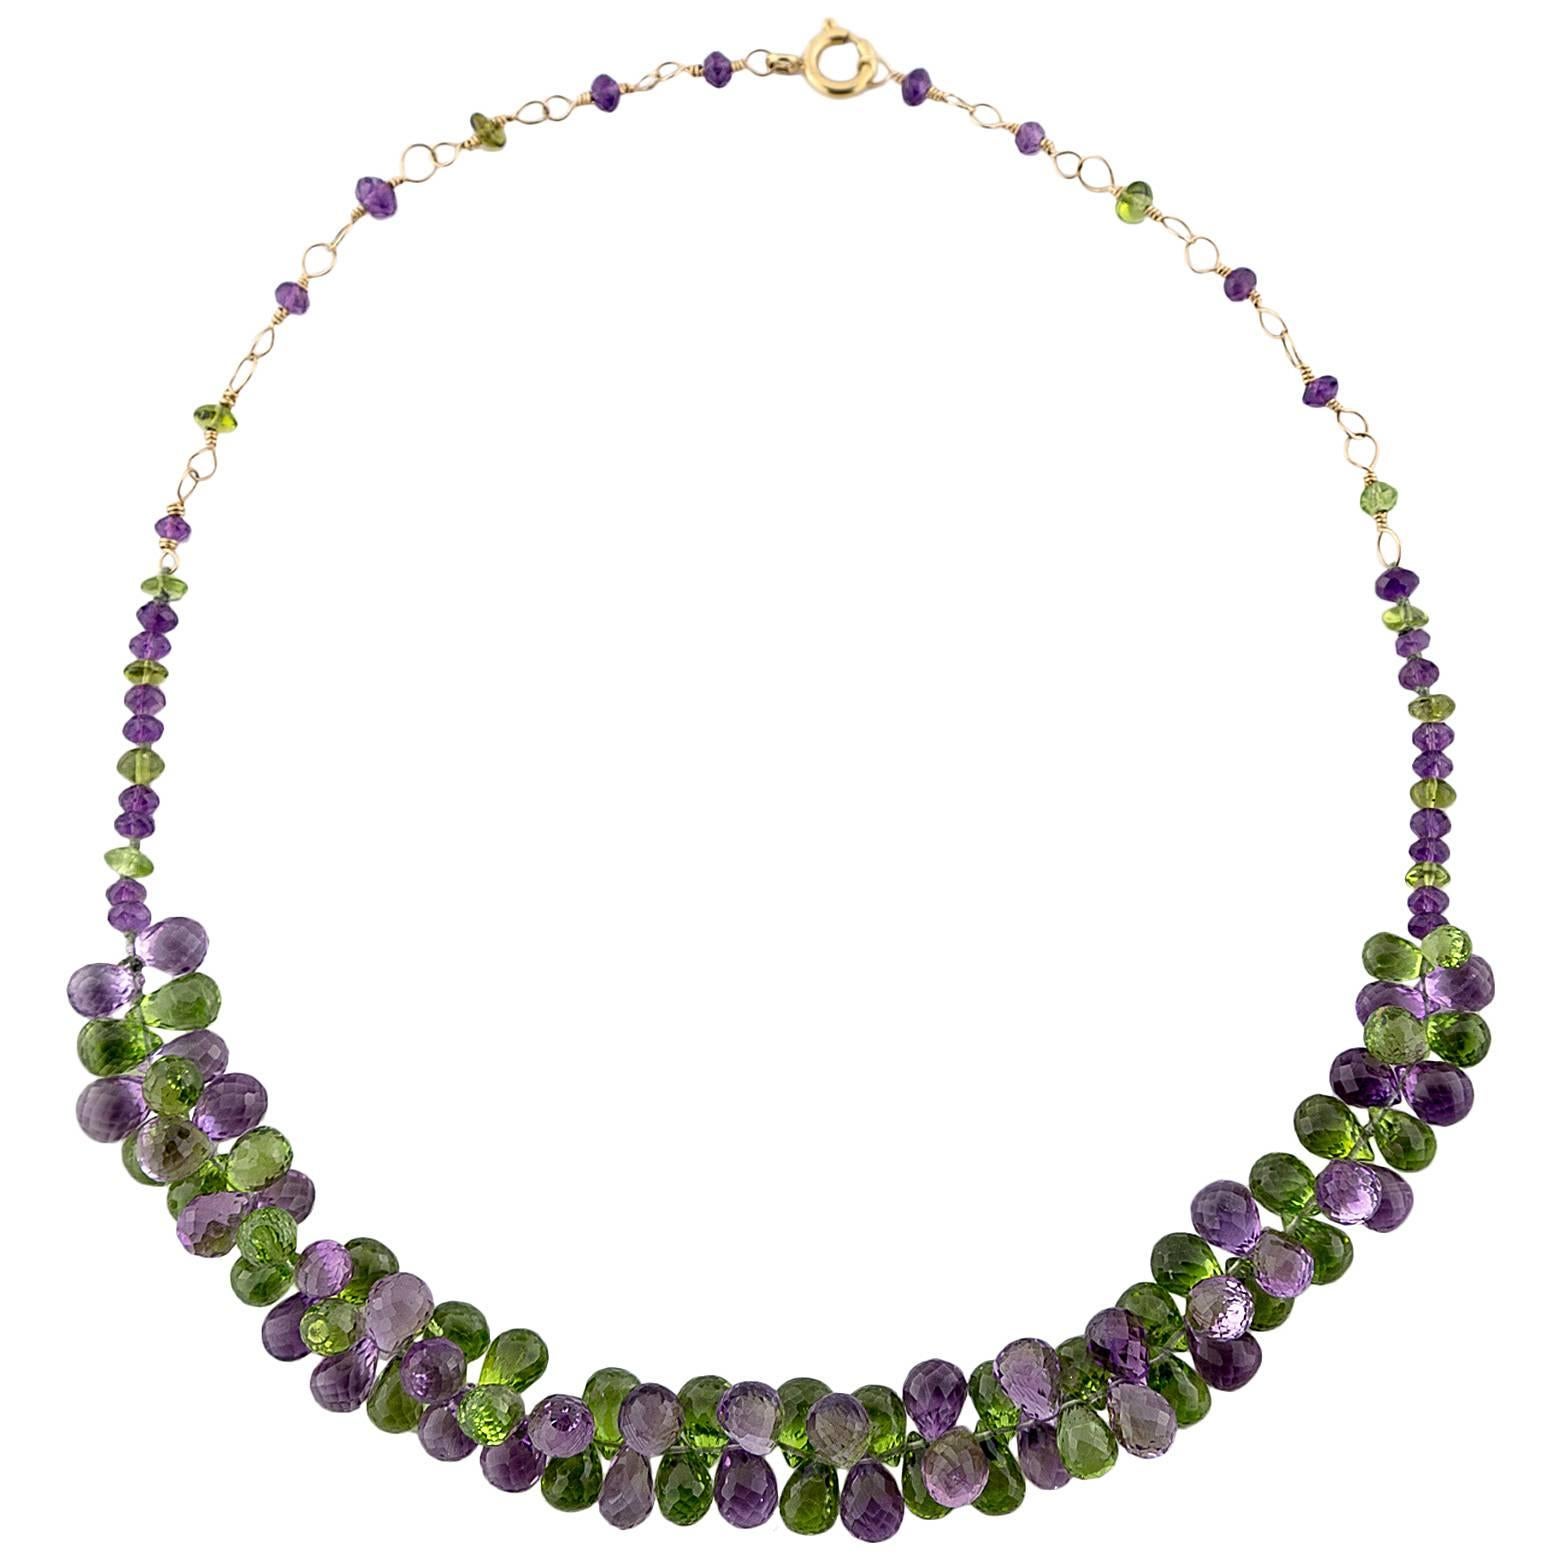 Gold Filled Necklace with Briolette Amethysts and Briolette Peridots